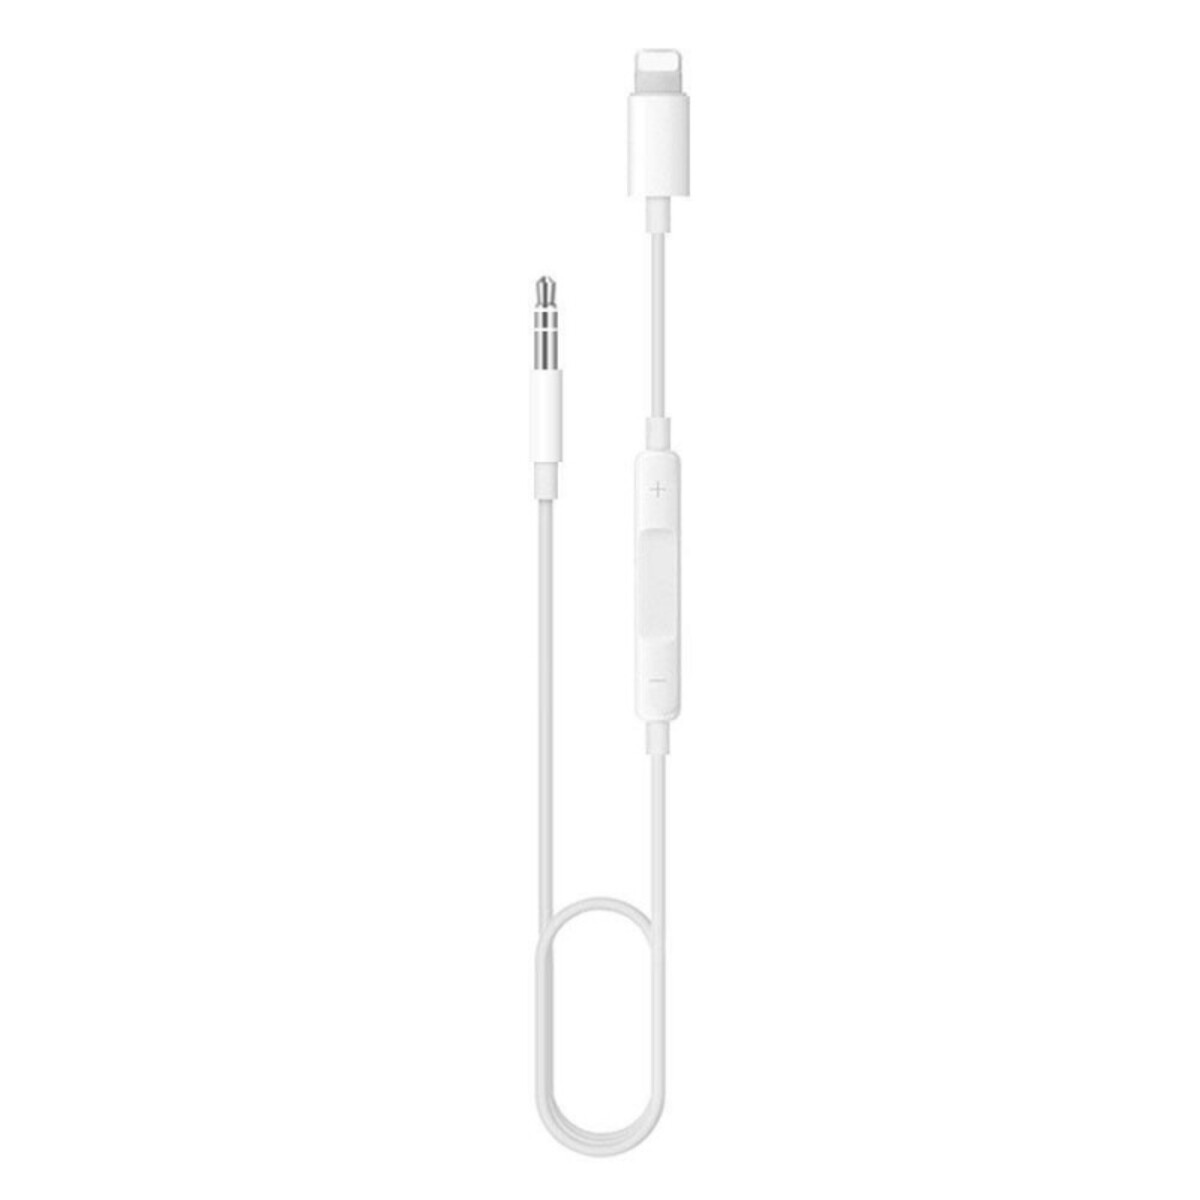 Trands Lightning To 3.5mm Male Aux Cable with Hands-free Remote Volume Control AU1958